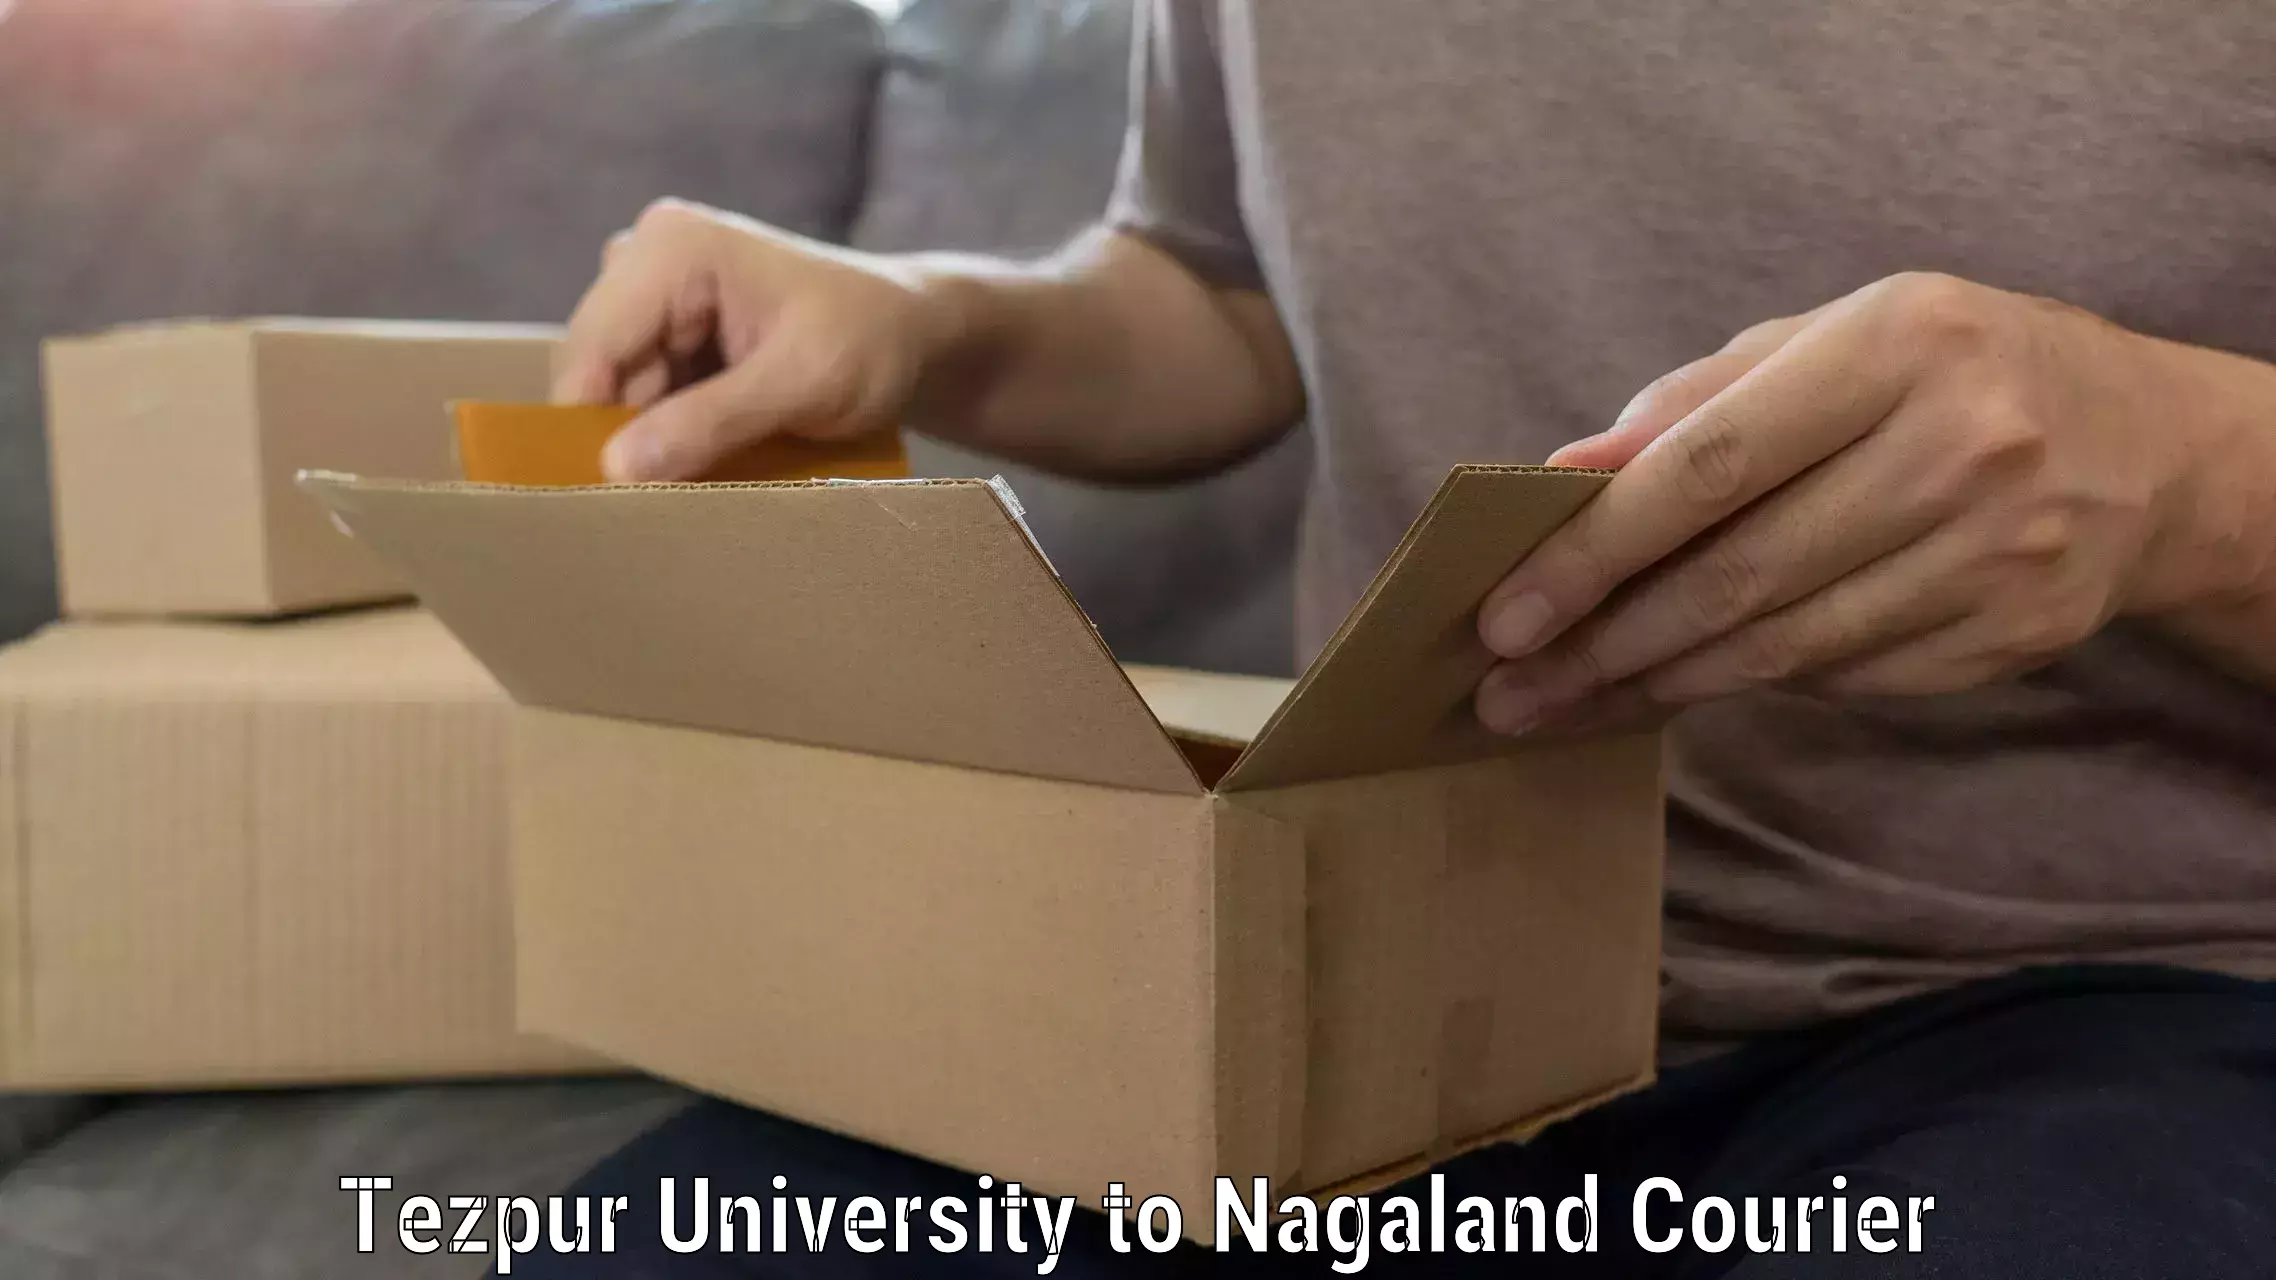 Efficient packing and moving Tezpur University to Nagaland